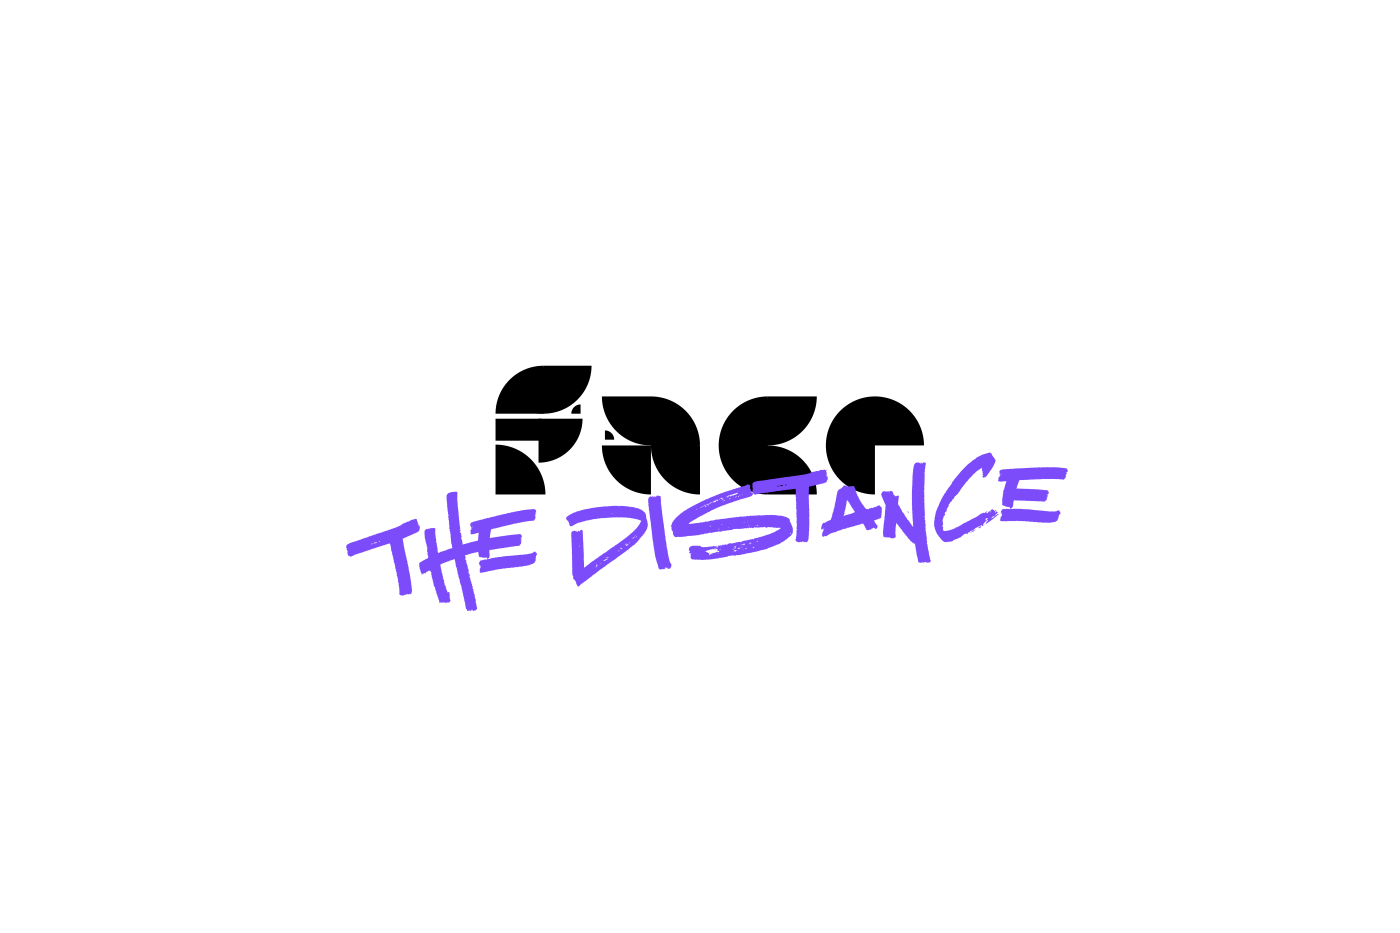 Face the distance (with mask)